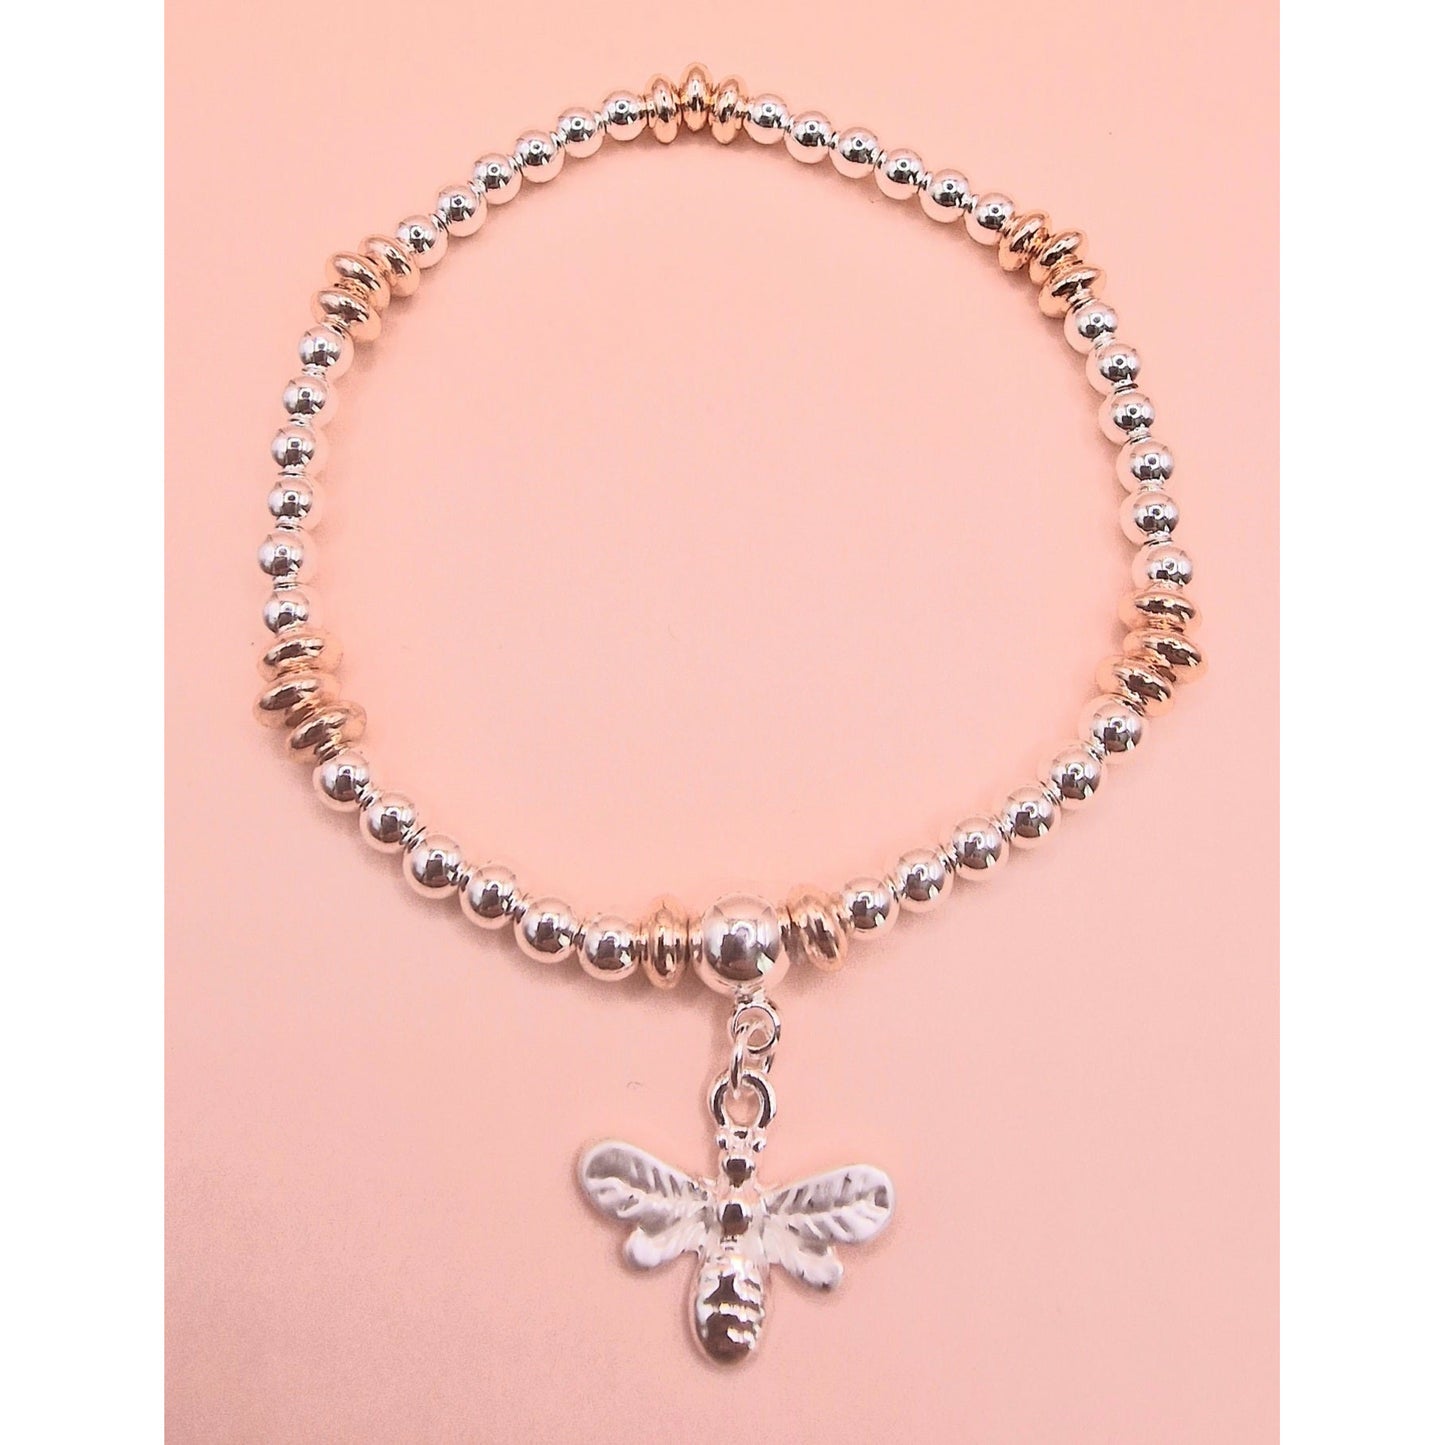 Bumble Bee Stretch Charm Bracelet Silver - Rose Gold Colour